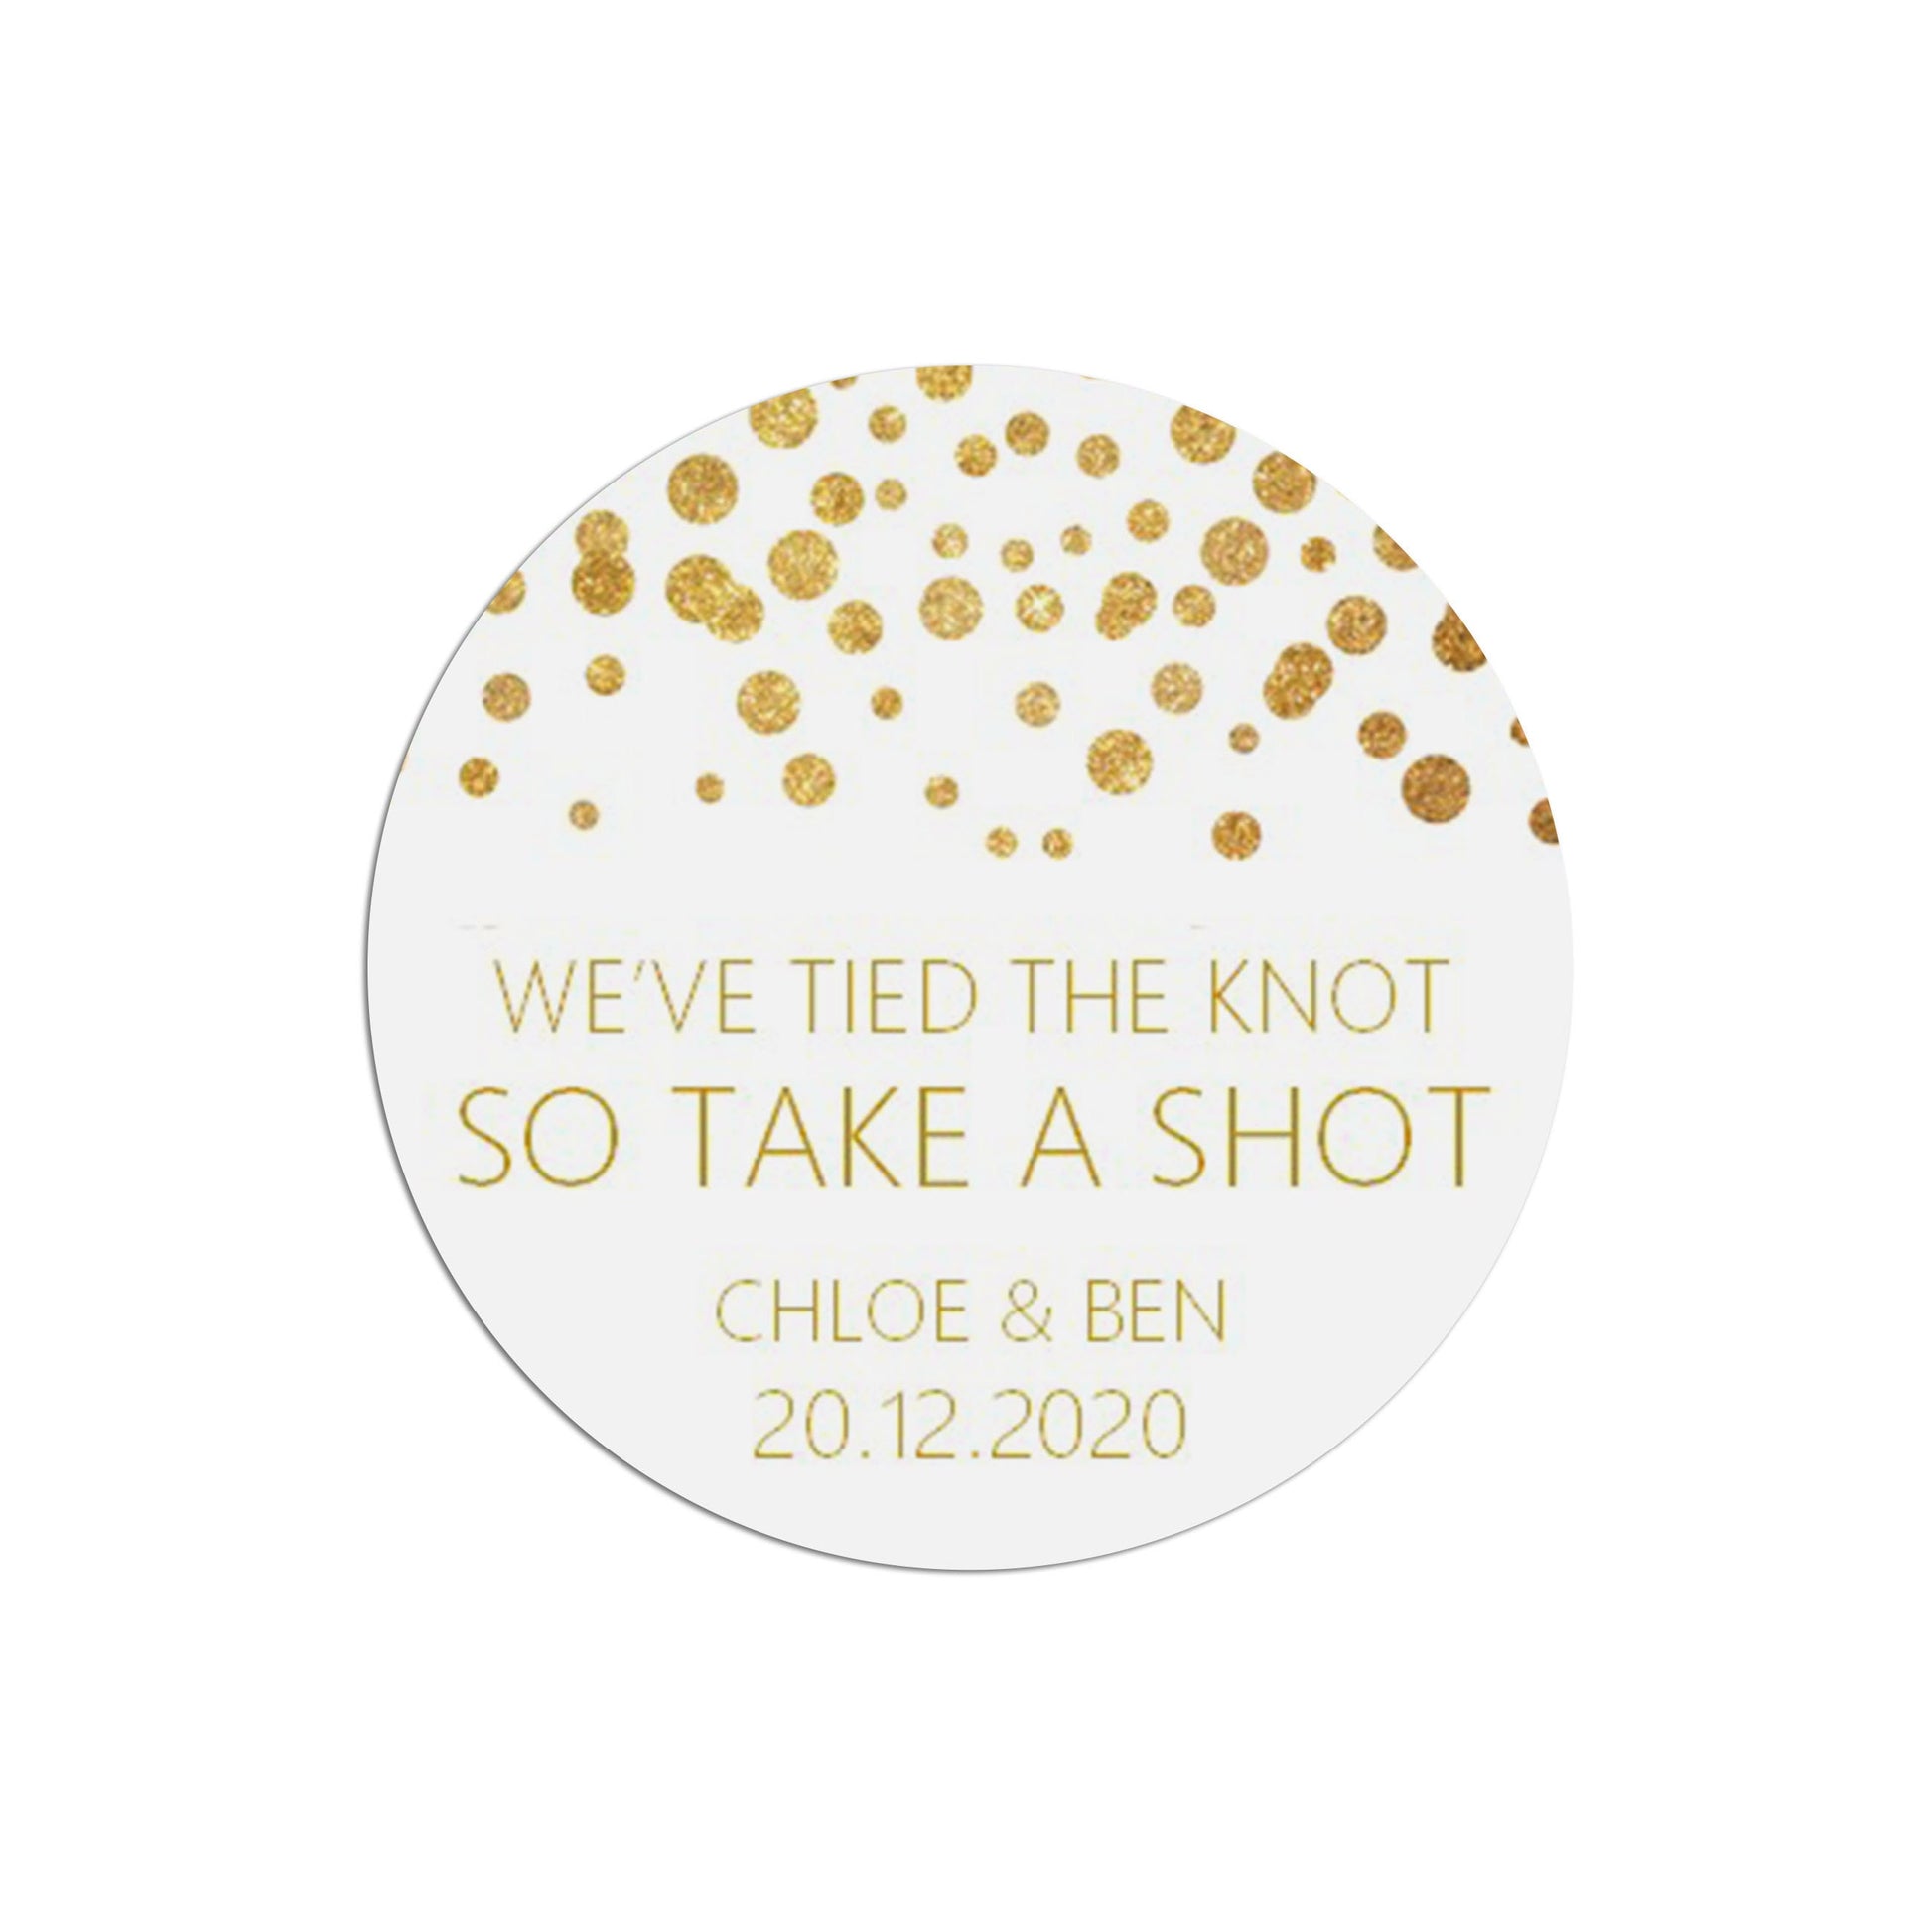 Take A Shot Wedding Stickers, Gold Effect 37mm Round Personalised x 35 Stickers Per Sheet